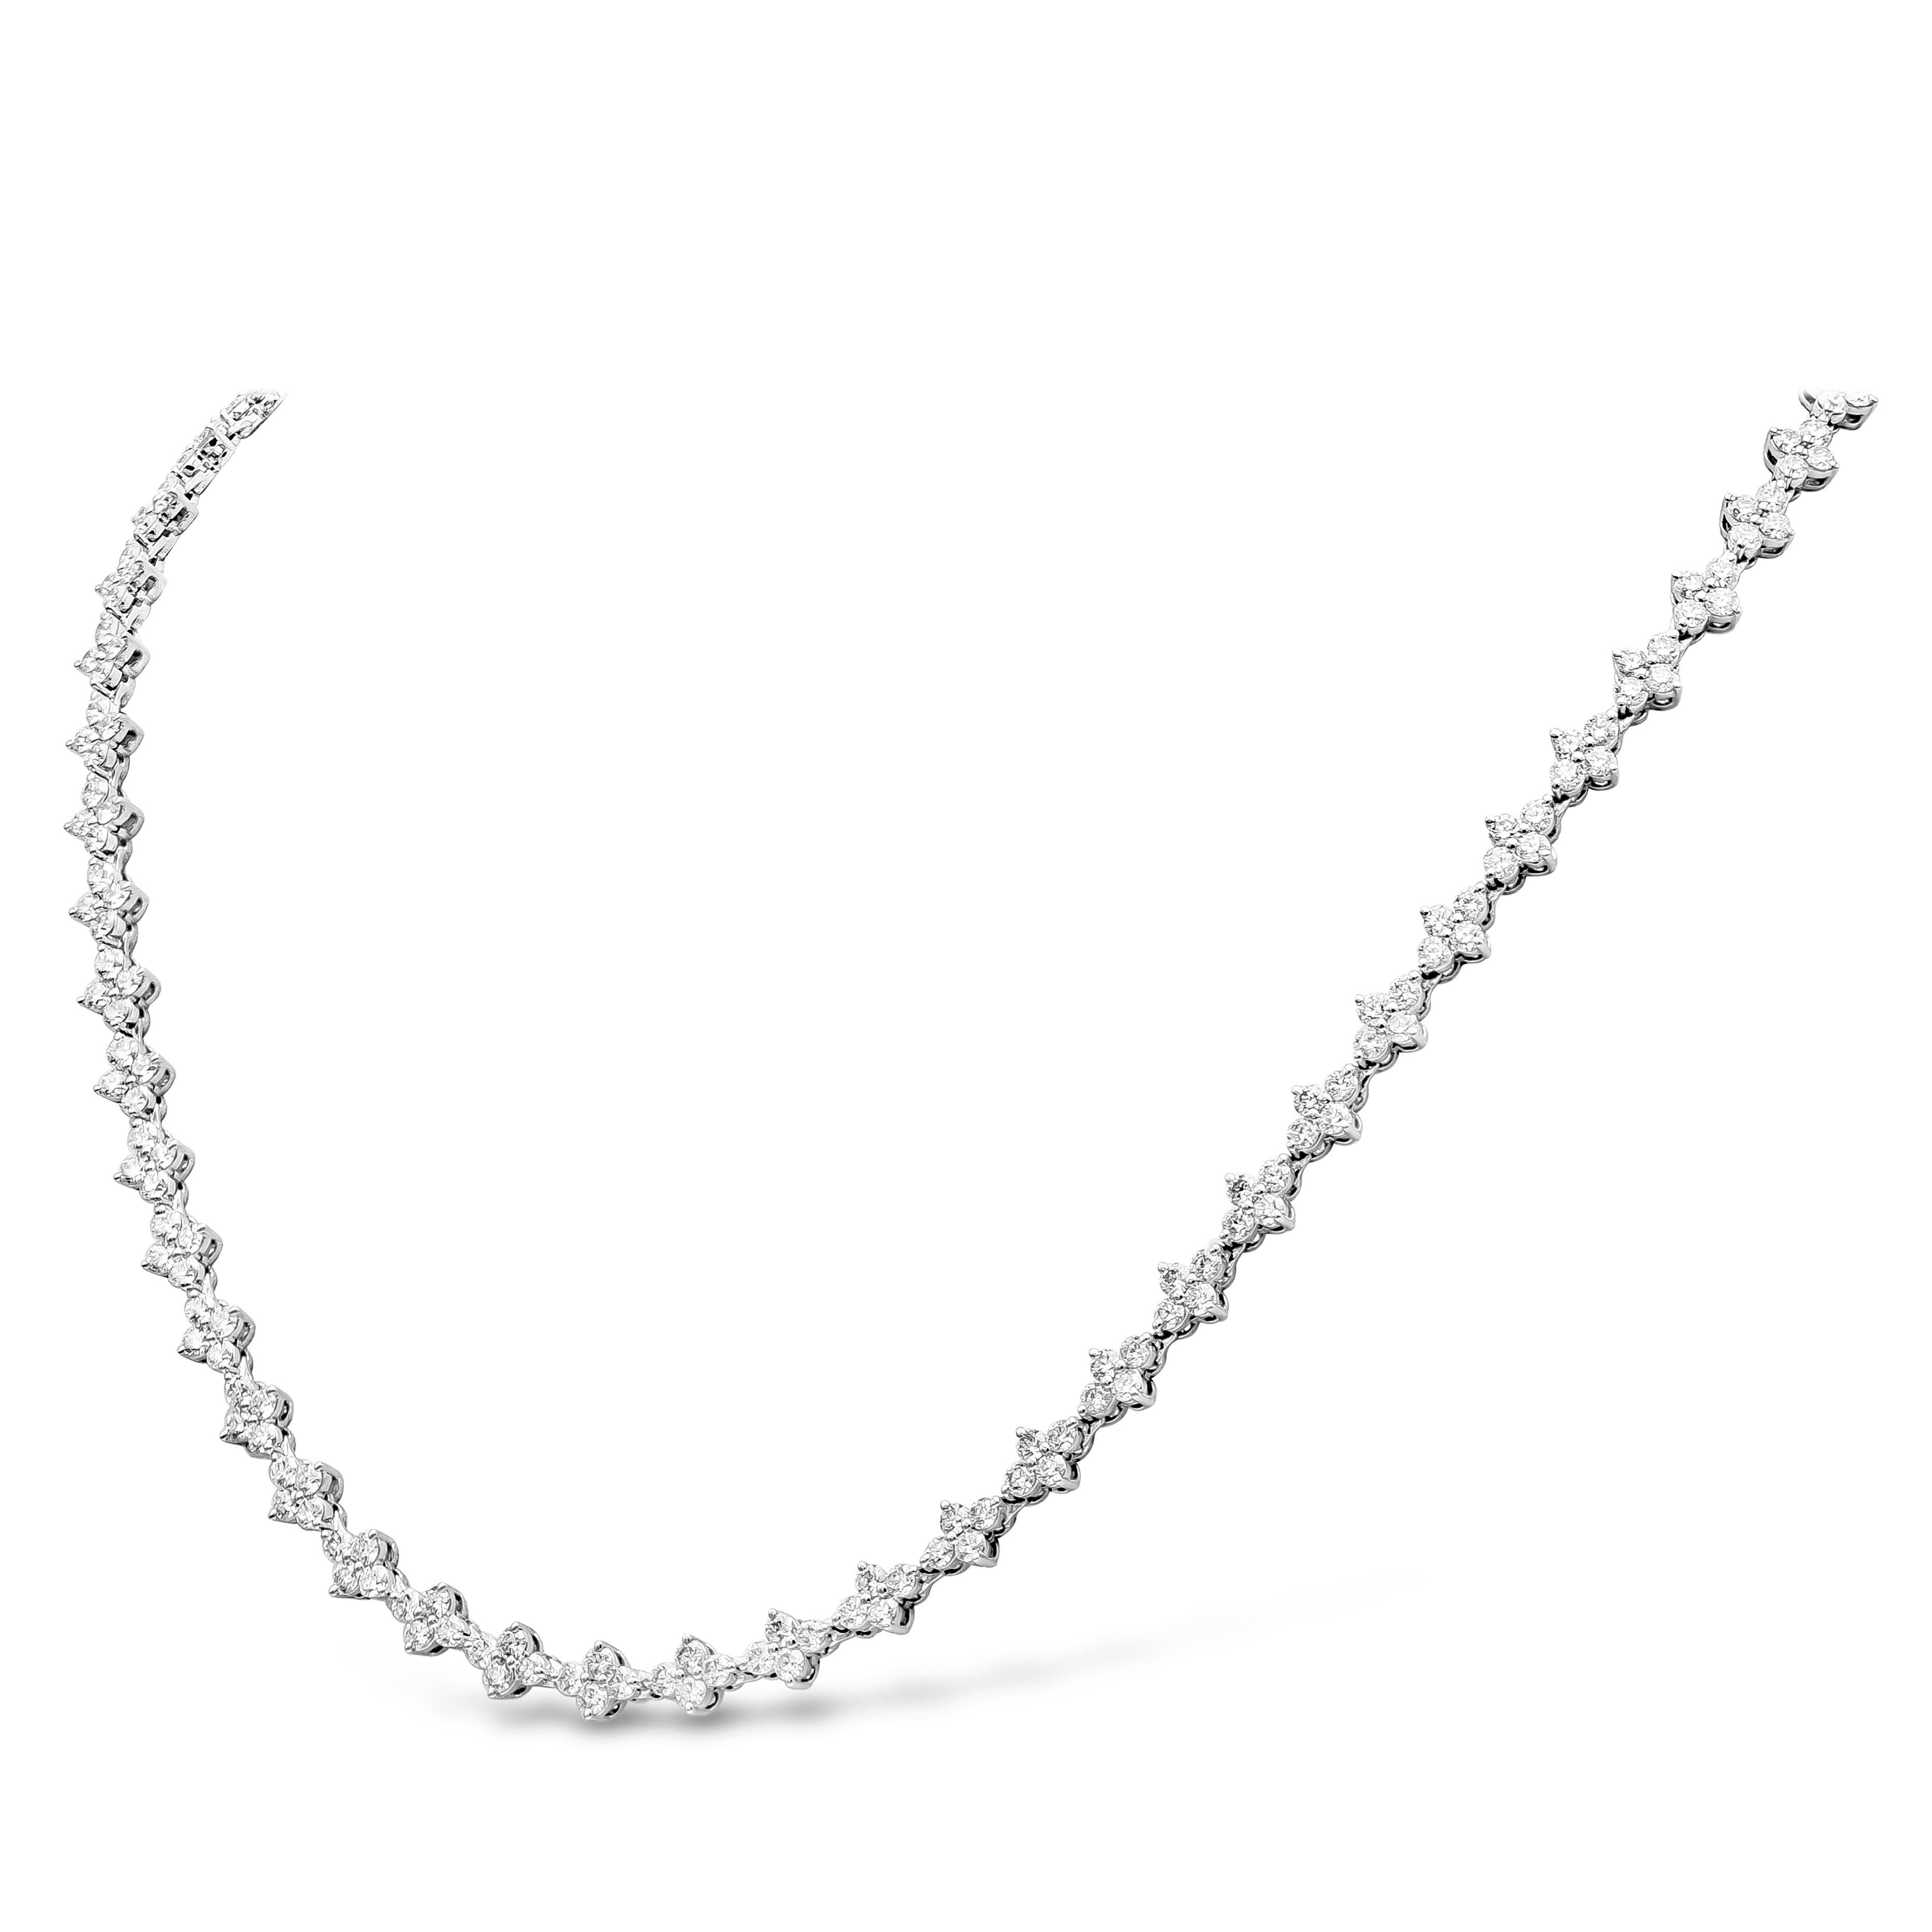 A magnificent diamond necklace showcasing round brilliant diamonds clustered in groups of 4. Necklace has 240 stone weighing 10.99 carats, F Color and VS/SI in Clarity. 18 inches long and made in 18k White Gold.

Roman Malakov is a custom house,